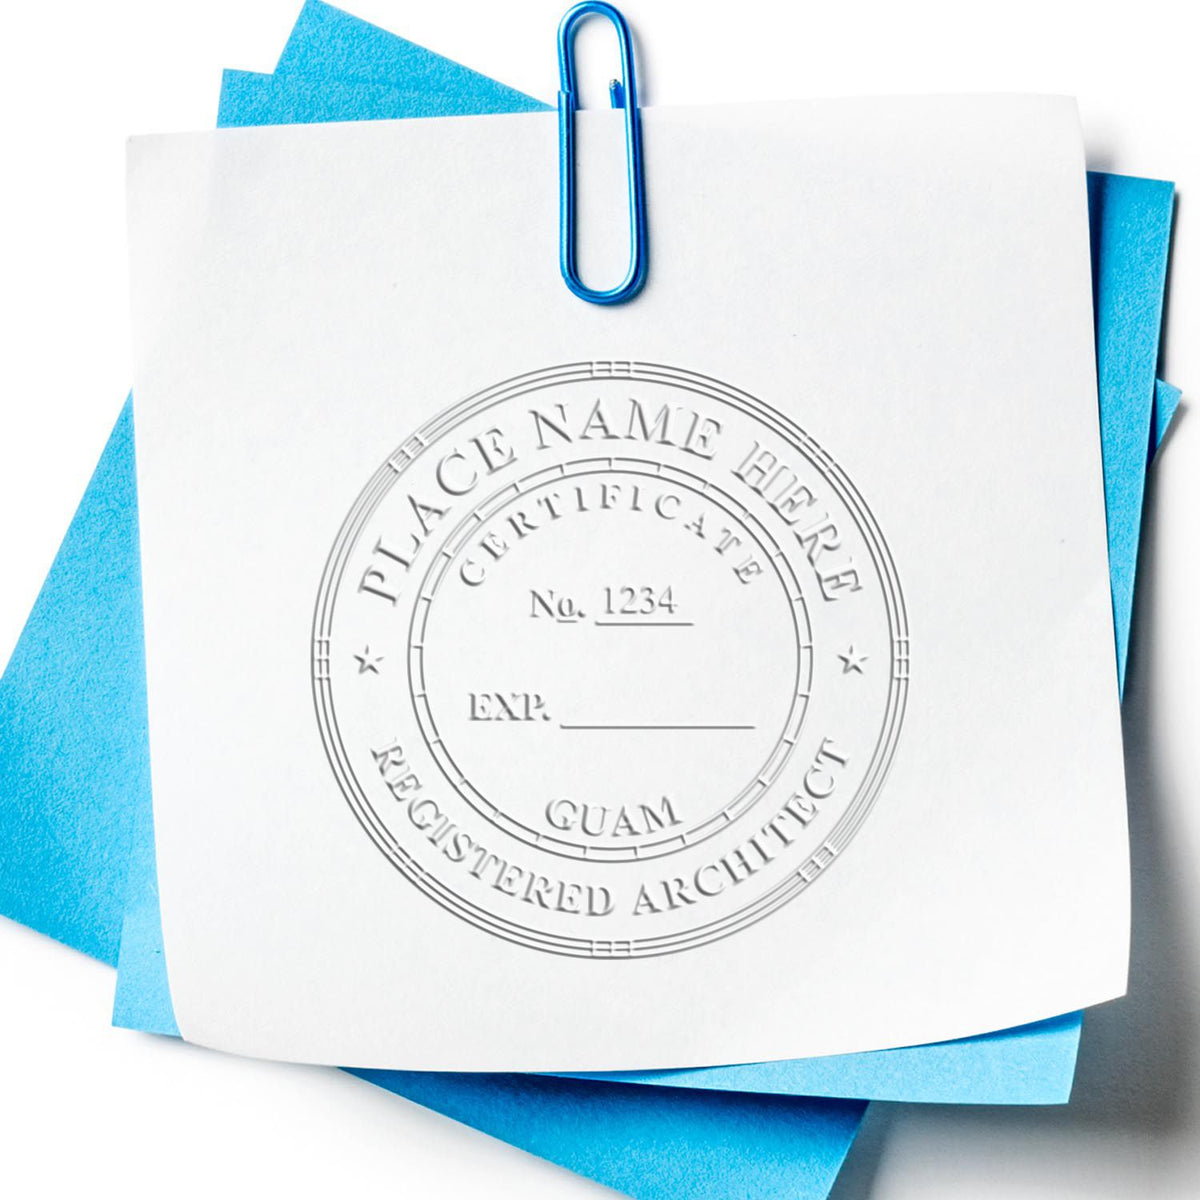 This paper is stamped with a sample imprint of the Extended Long Reach Guam Architect Seal Embosser, signifying its quality and reliability.